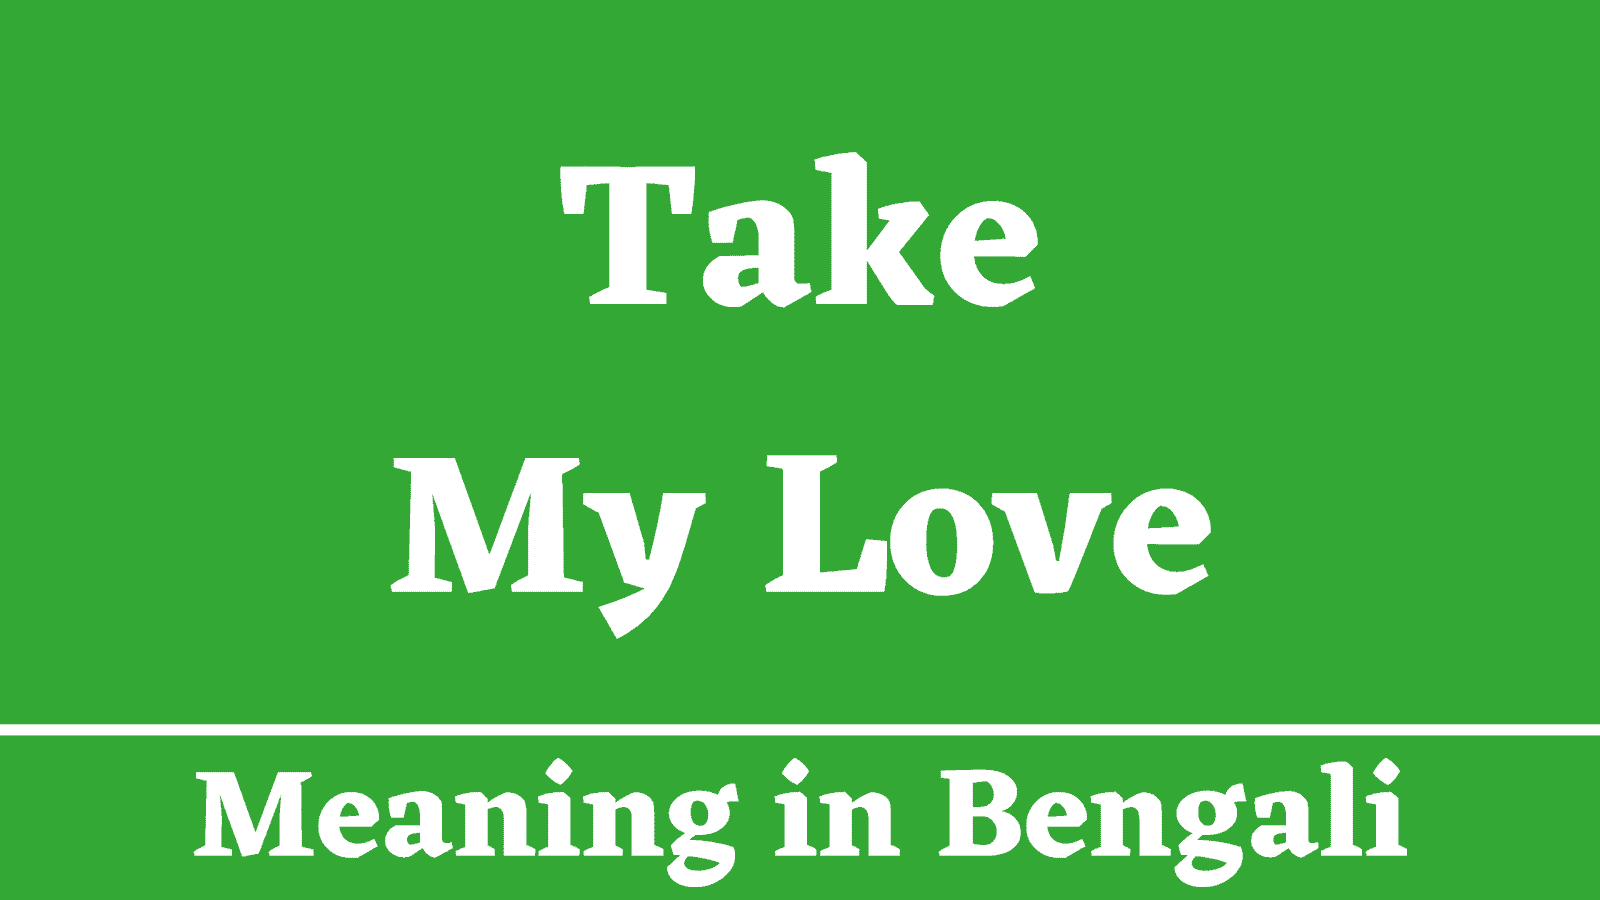 Take My Love Meaning in Bengali